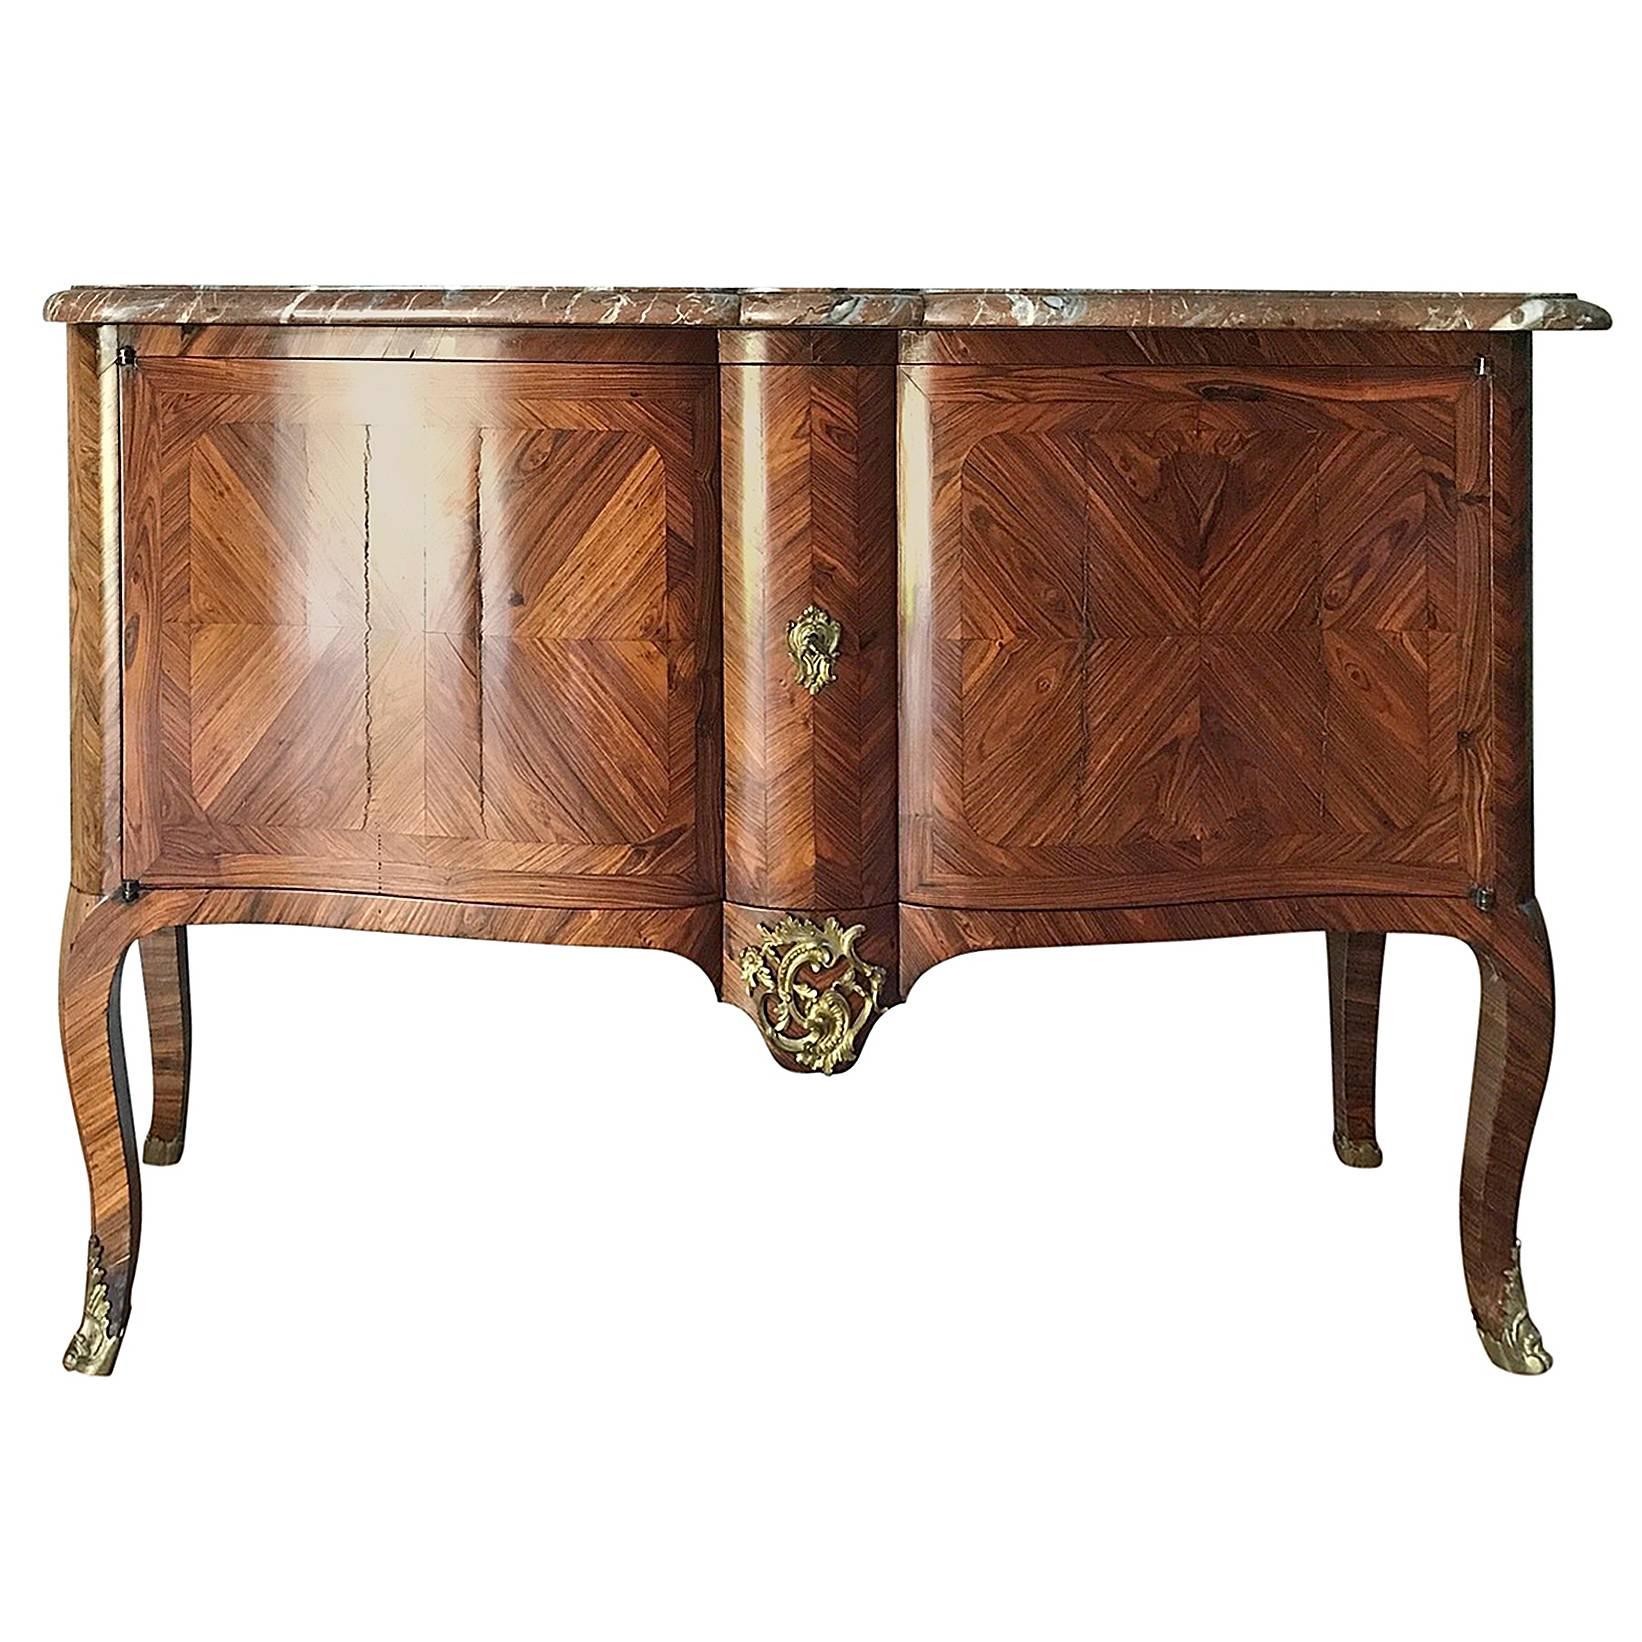 French Louis XV Style Enfilade Buffet Credenza with Marquetry Early 19th Century